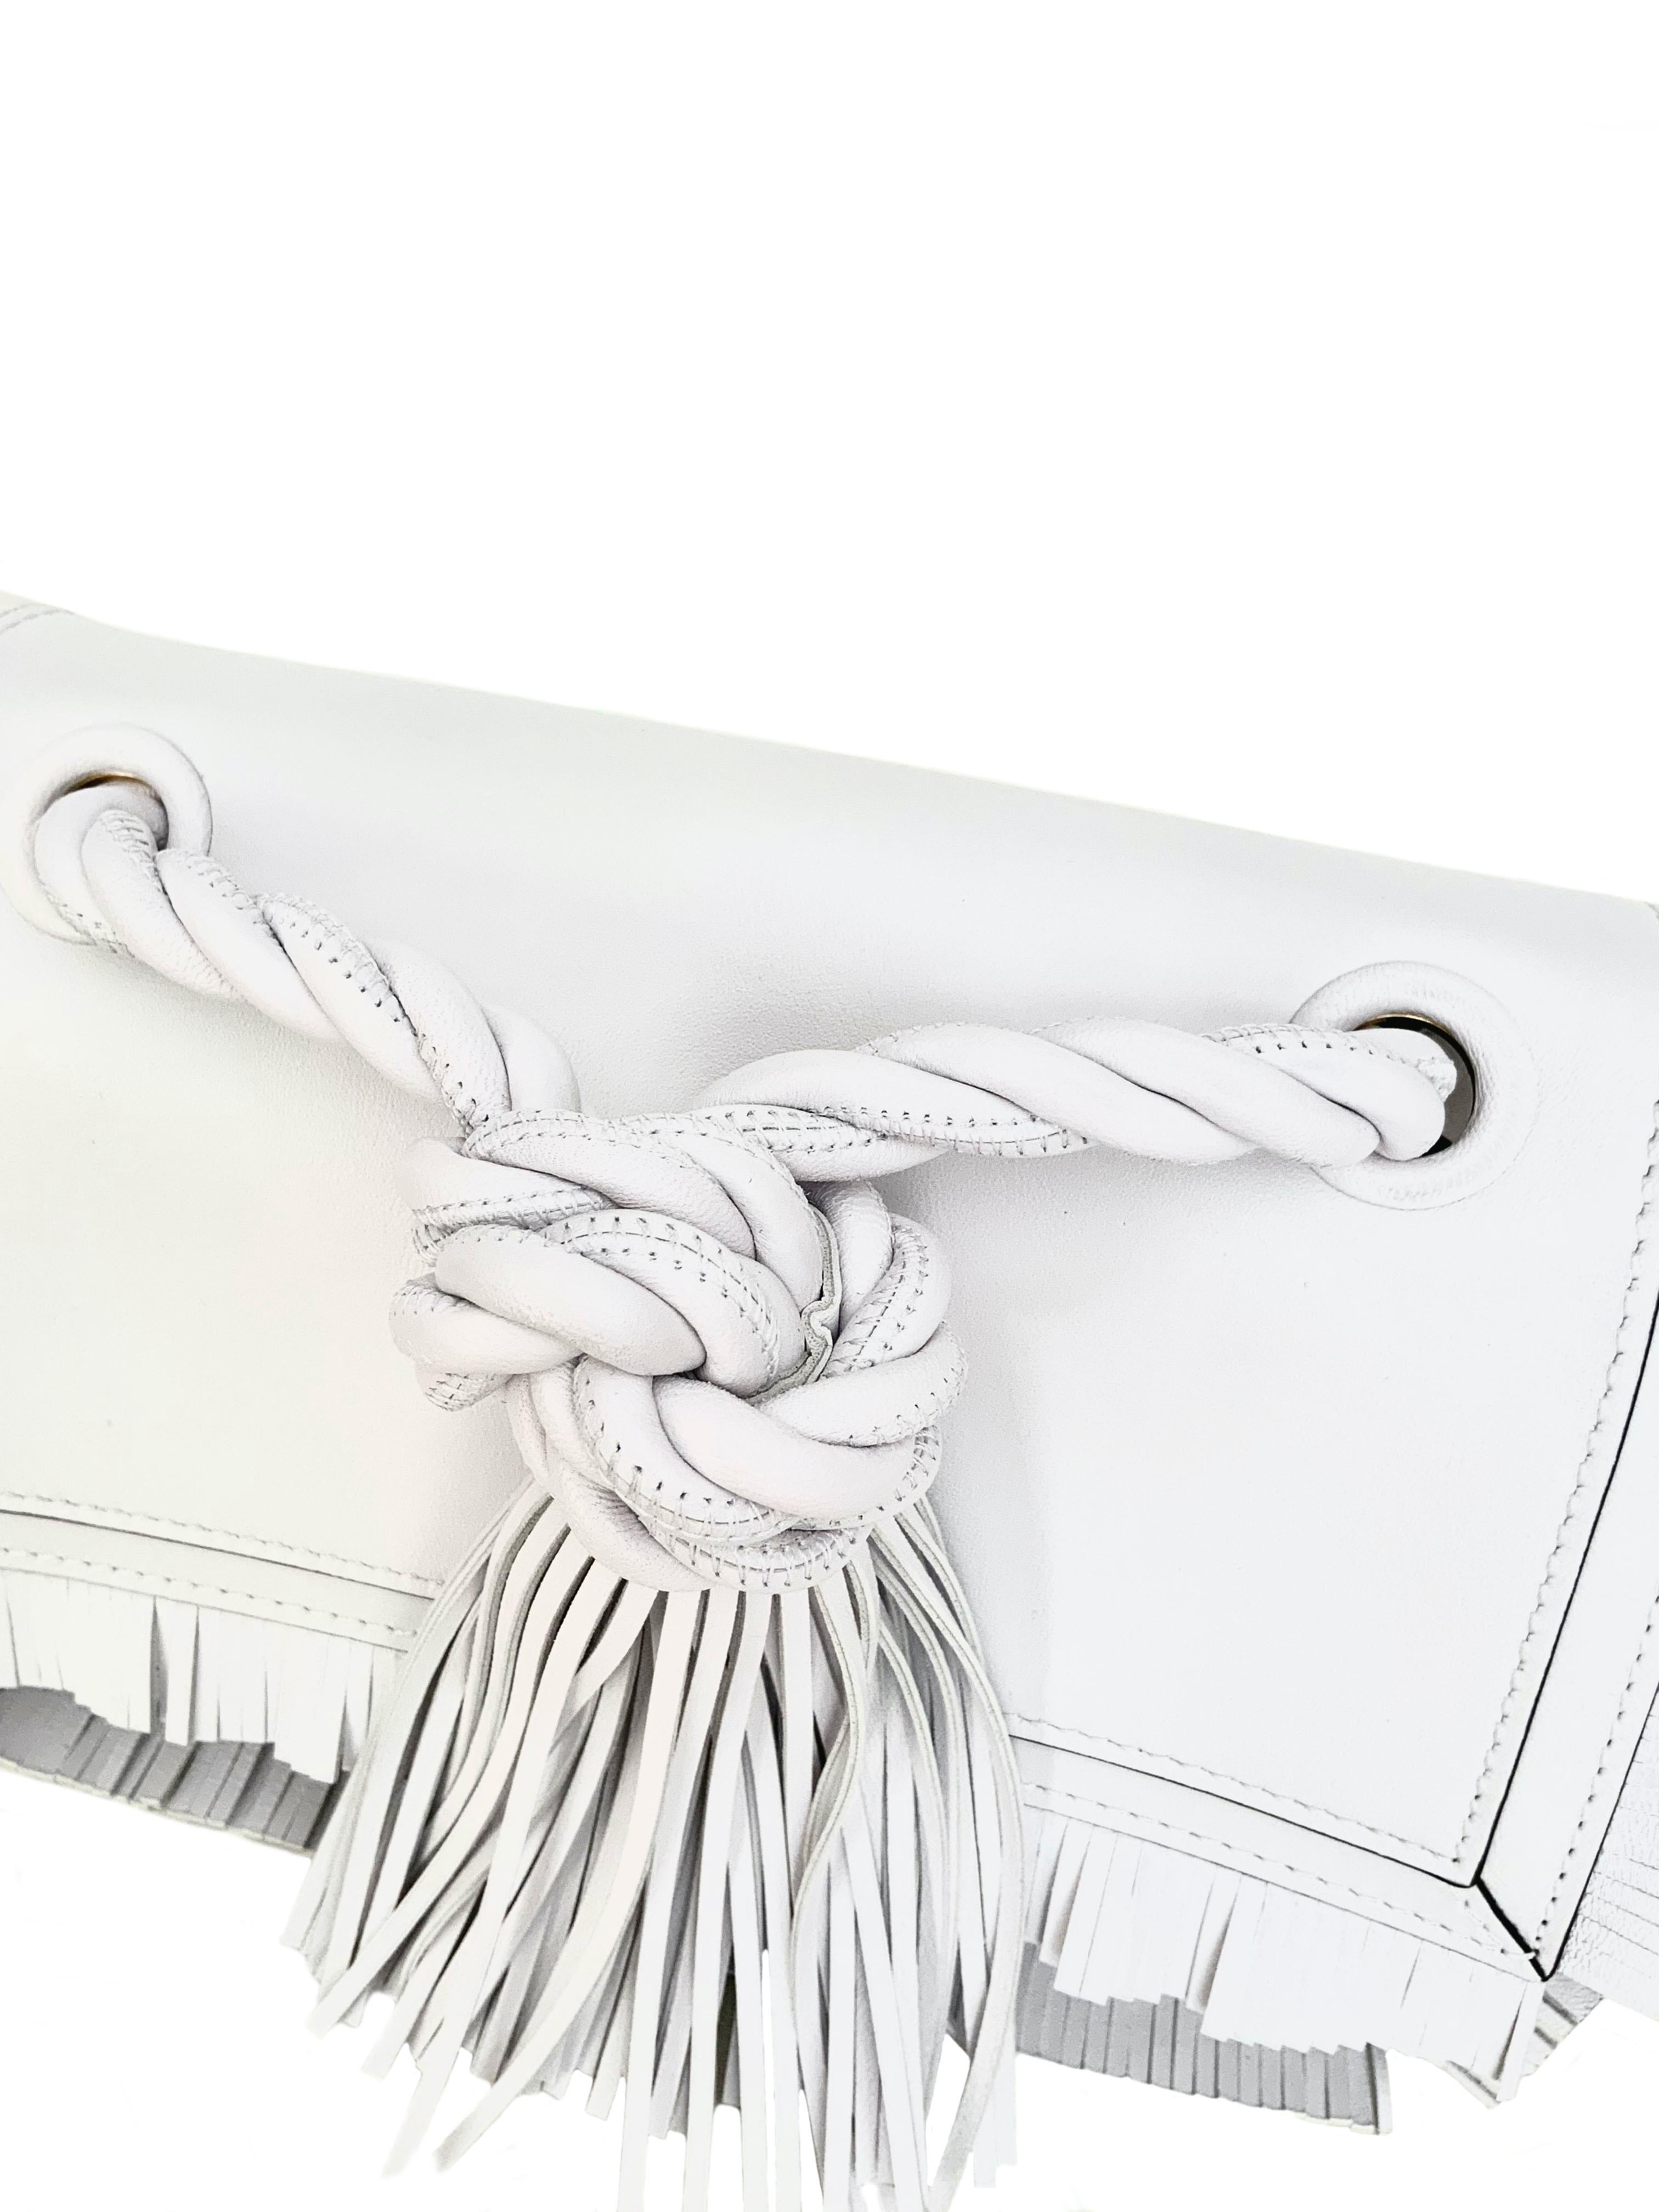 Decorated with subtle fringing edges and a rope top handle with tassle, this pre-owned but new bag from the house of Valentino Garavani is crafted in smooth lambskin with a well-lined suede interior.
Removable shoulder strap.

Collection: